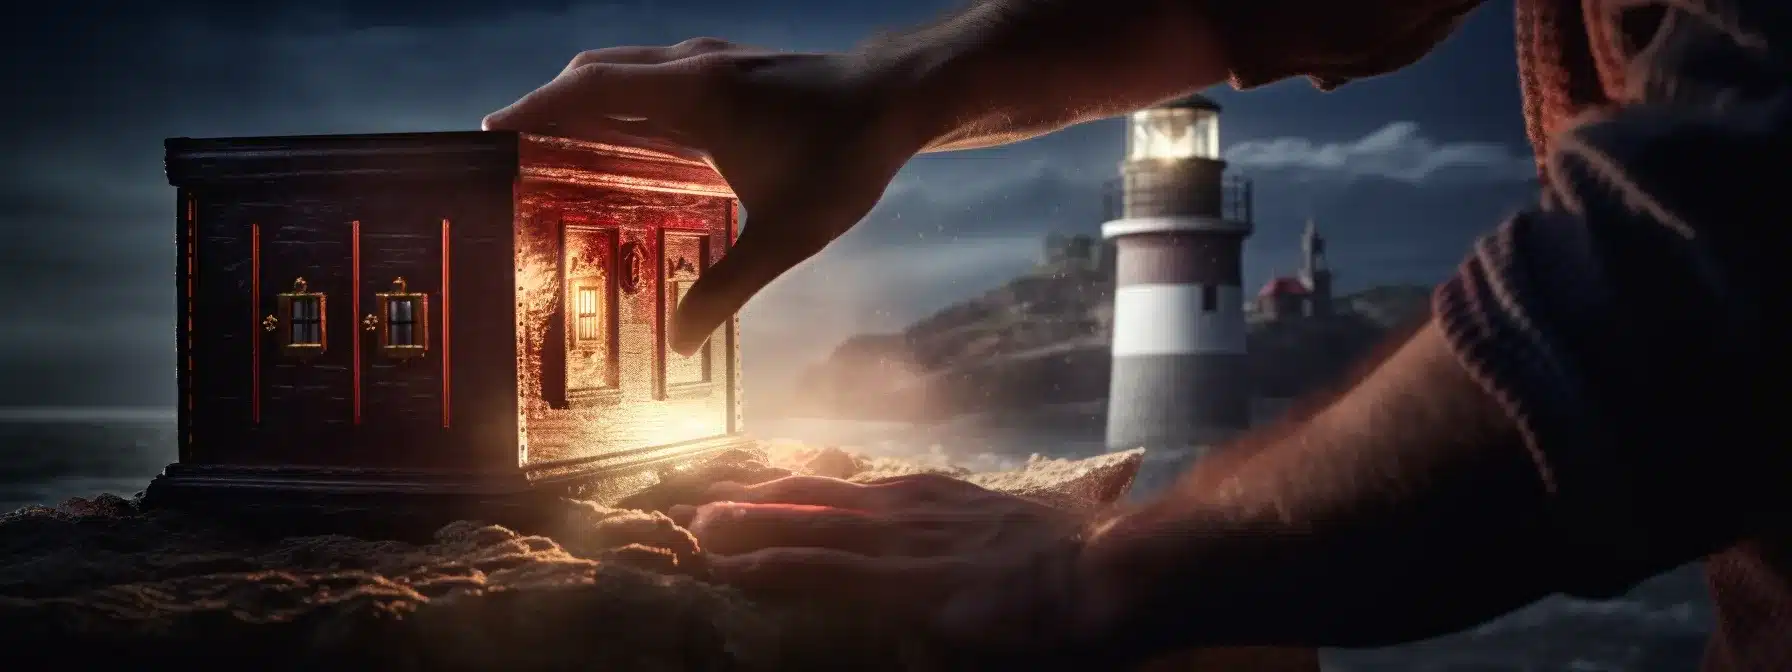 A Hand Opening A Treasure Chest Revealing A Glowing Lighthouse And A Brand Strength Score.